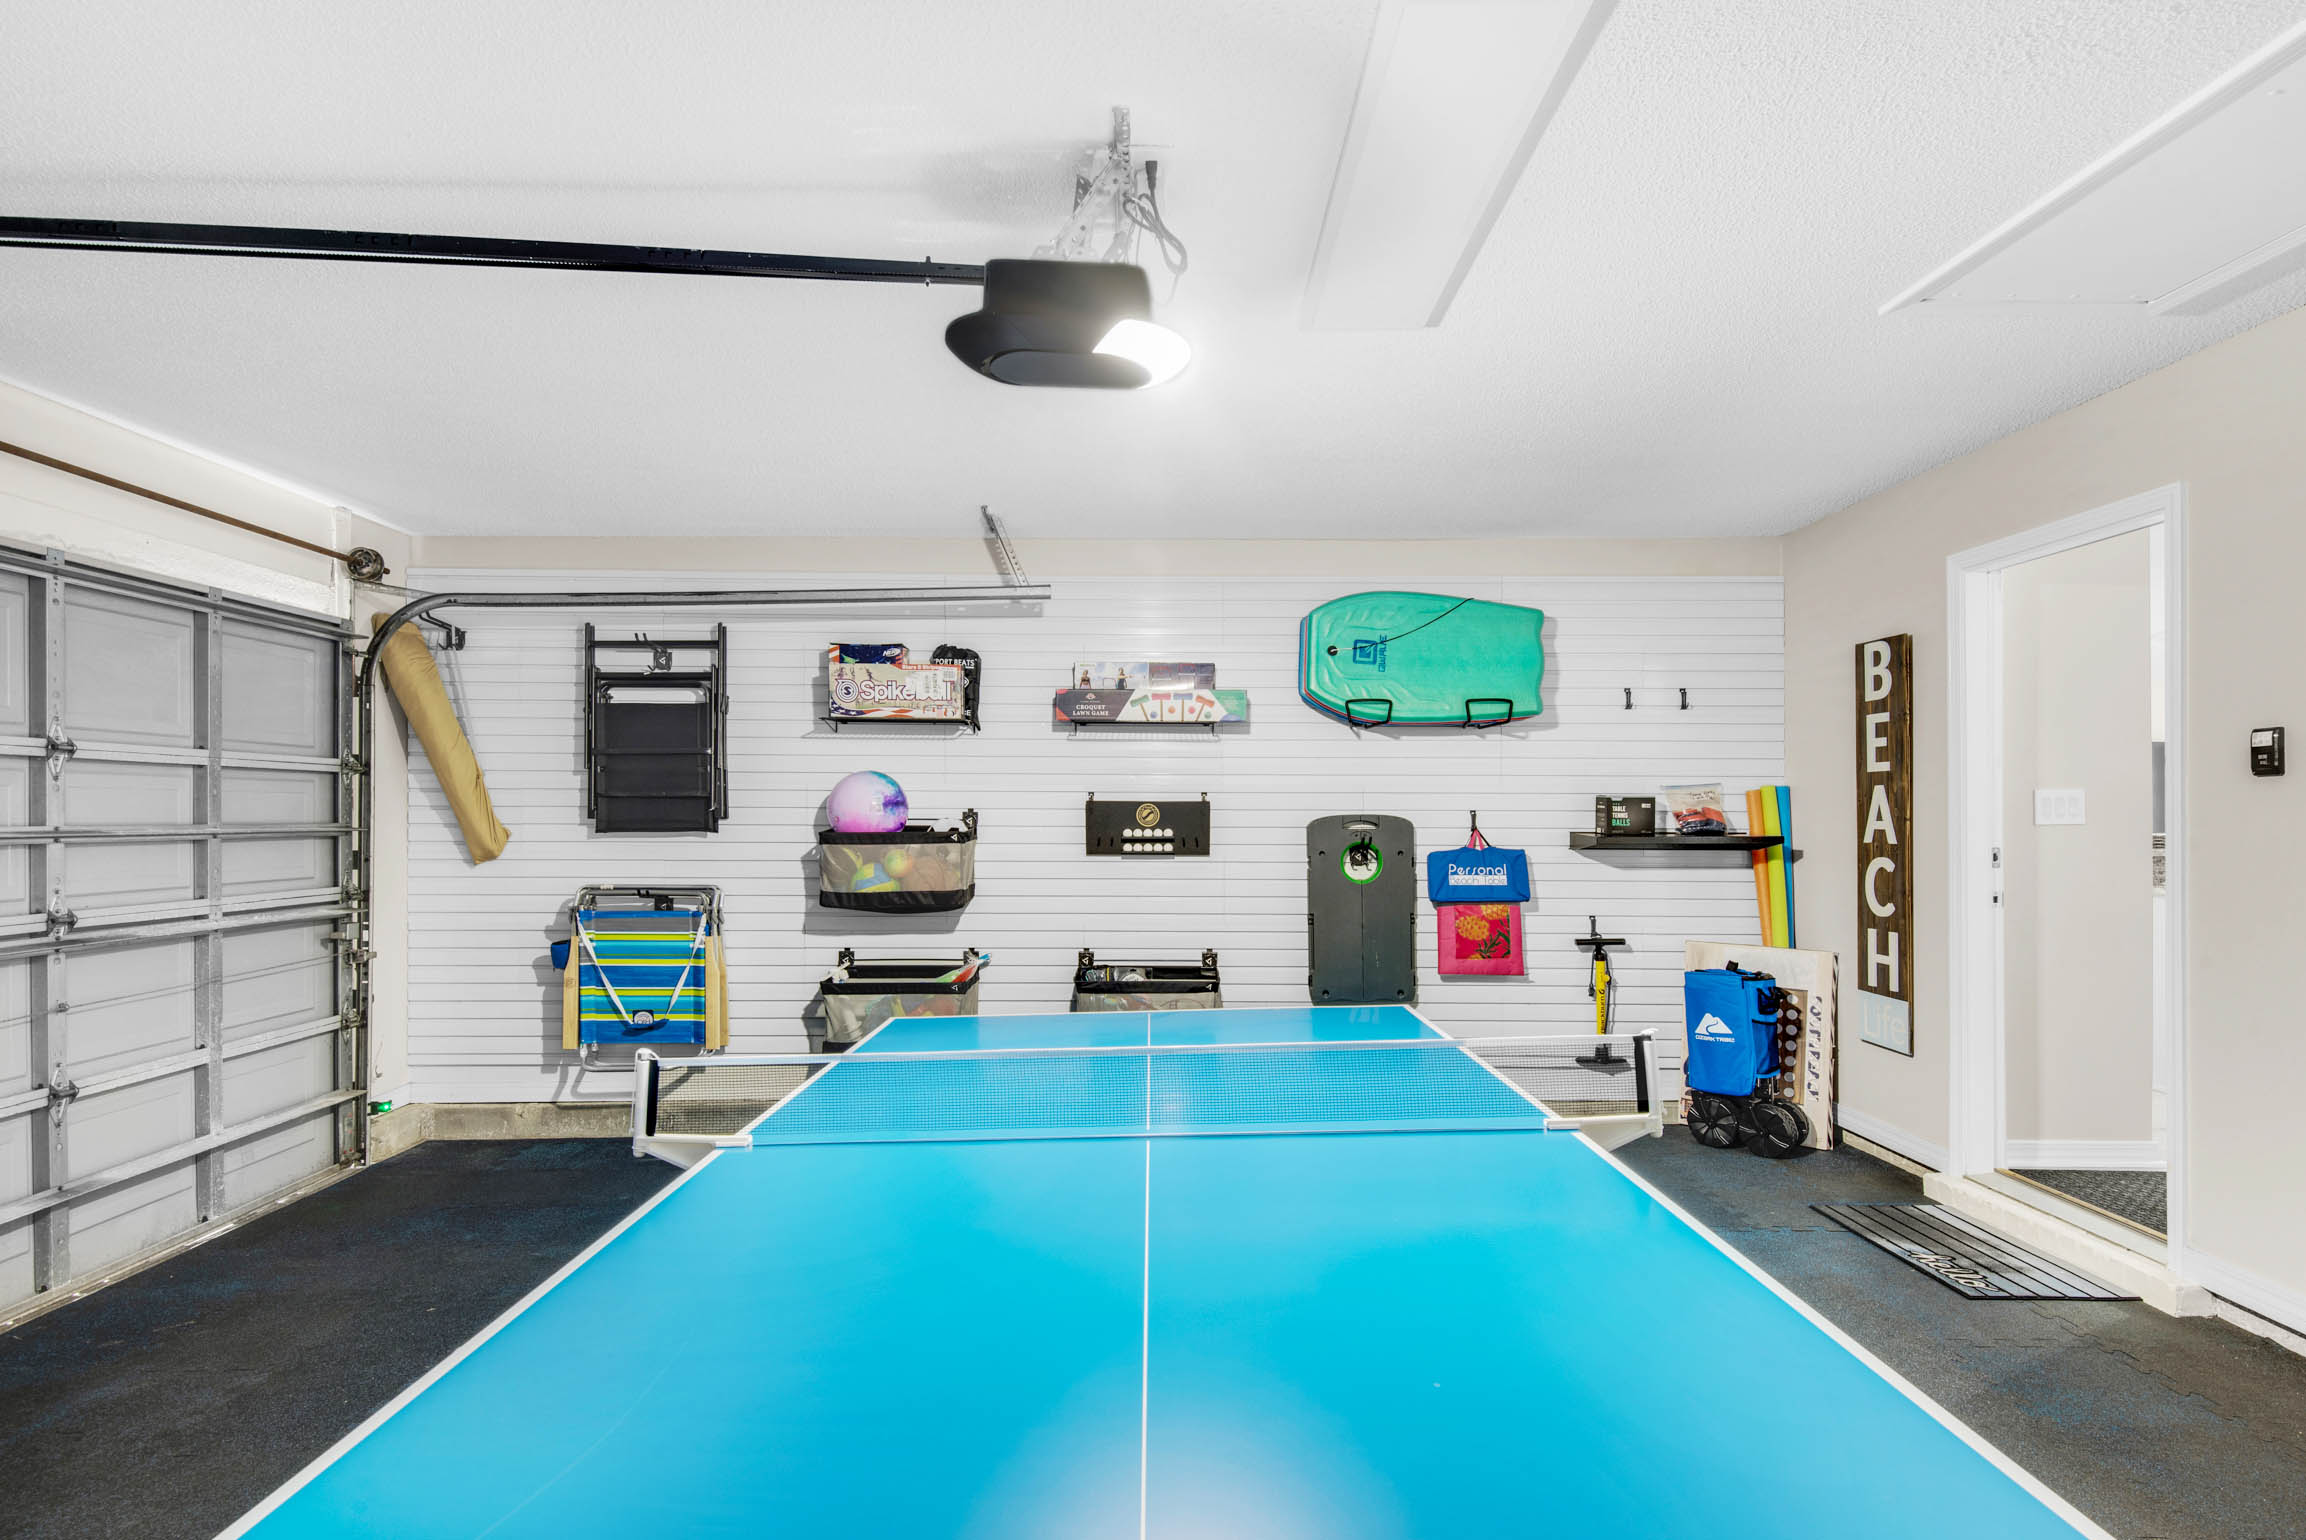 Ping pong table in the garage